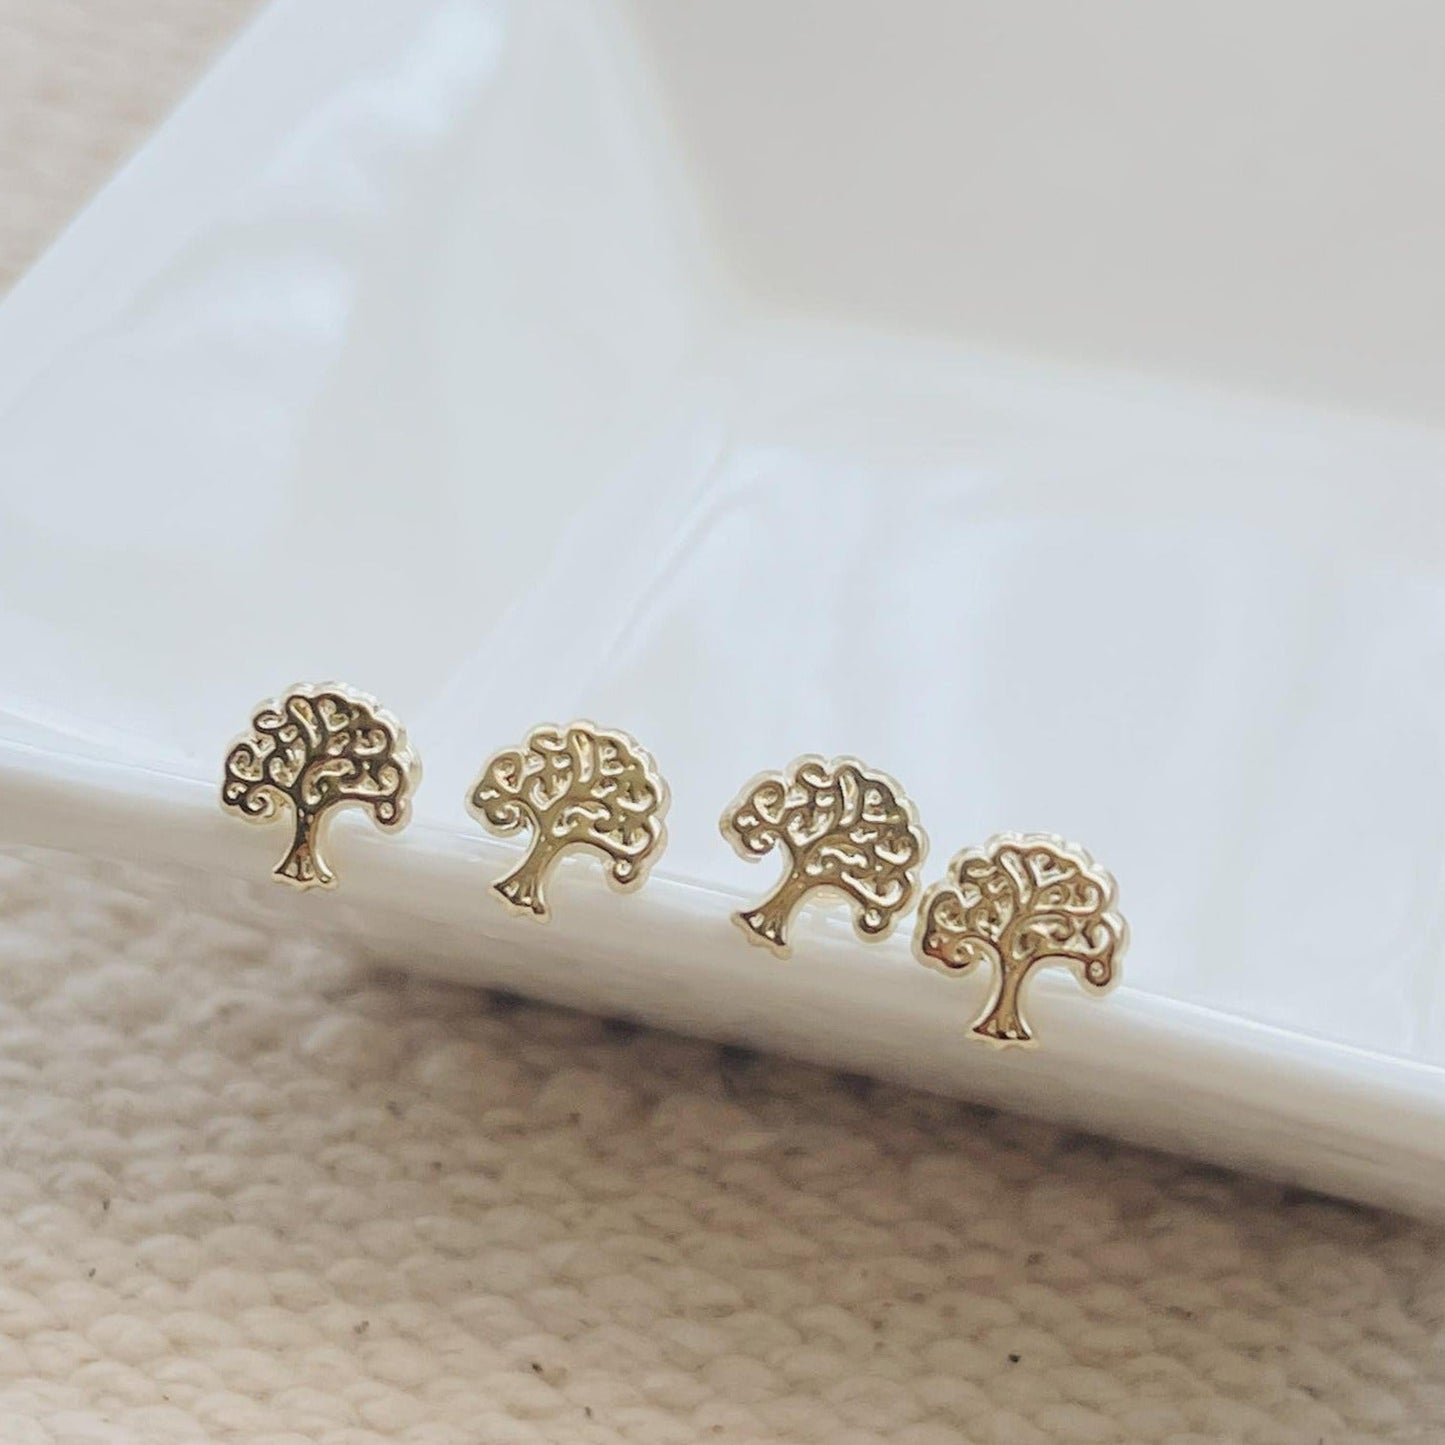 Our gold tree of life earrings are the perfect gift for her. These earrings are perfect for any occasion: christmas, valentines day, mother's day, birthday, anniversary or just because you love her.